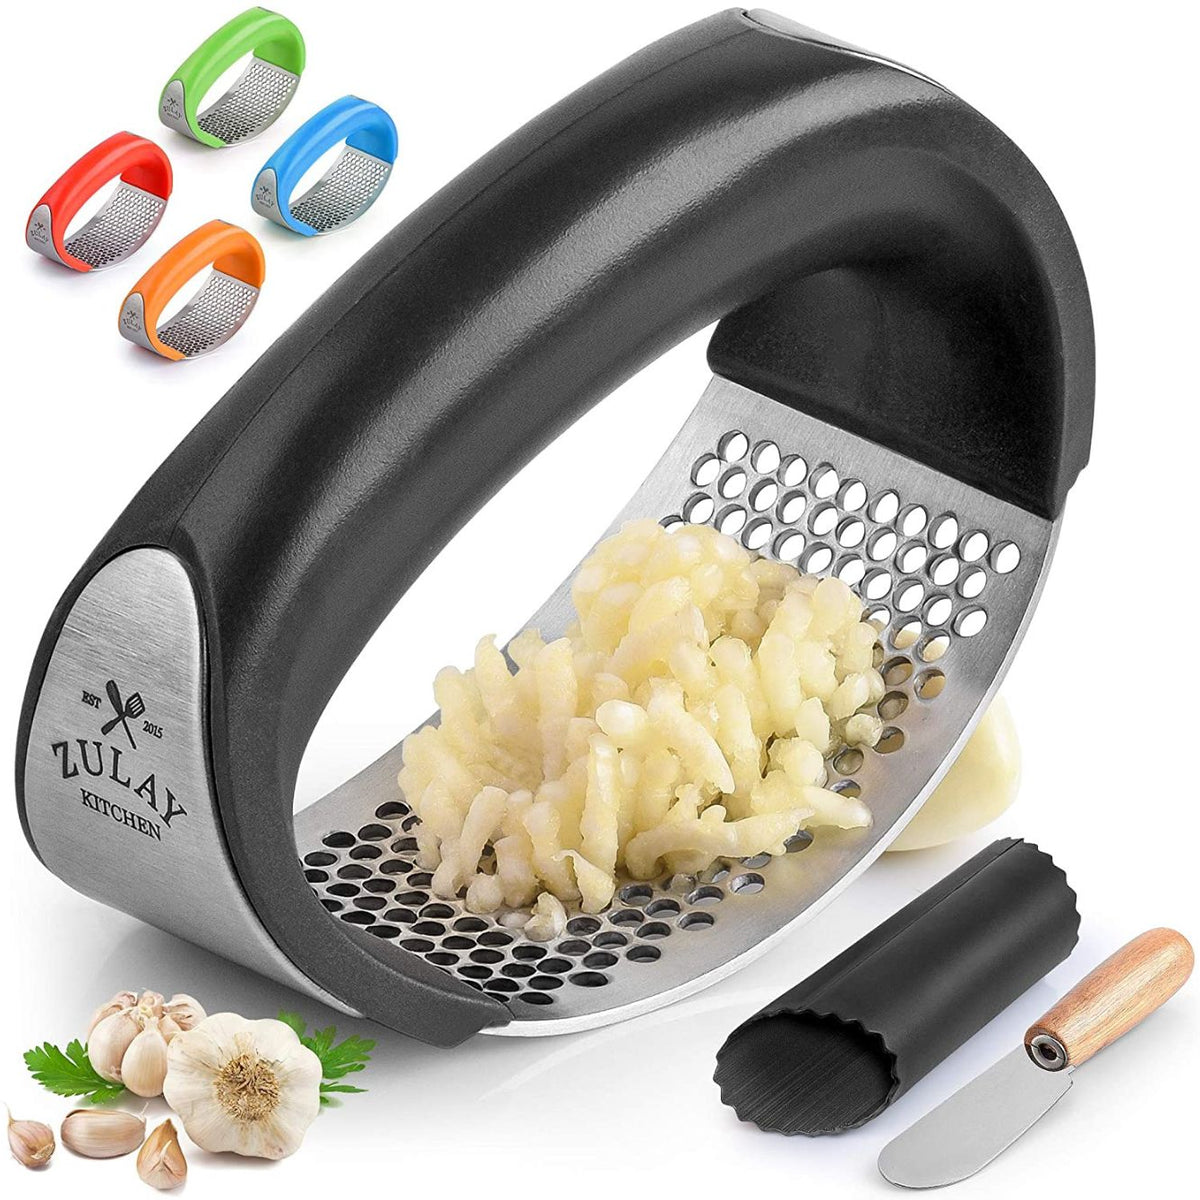 Zulay Kitchen Garlic Press With Soft, Easy To Squeeze Ergonomic Handle -  Garlic Mincer Tool With Sturdy Design Extracts More Garlic Paste - Easy To